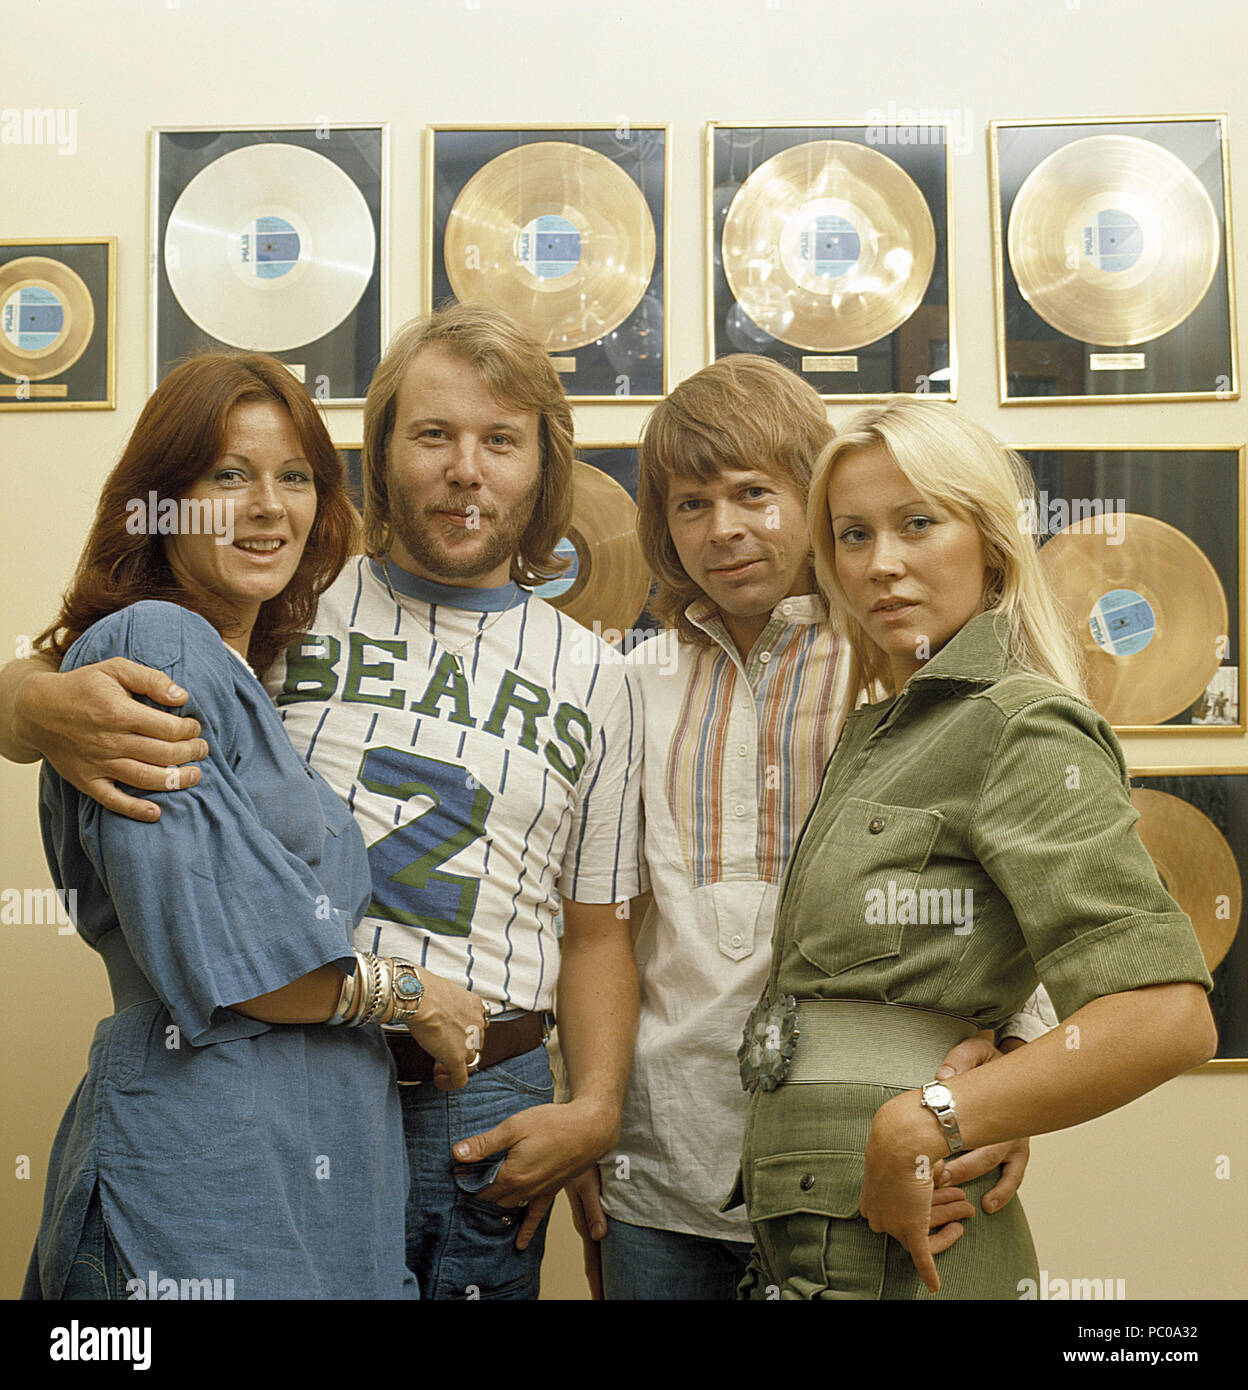 ABBA. Anni-Frid Lyngstad, Benny Andersson, Agnetha Fältskog and Björn Ulvaeus in the 1970s in front of a wall full of gold records for record selling albums. Stock Photo